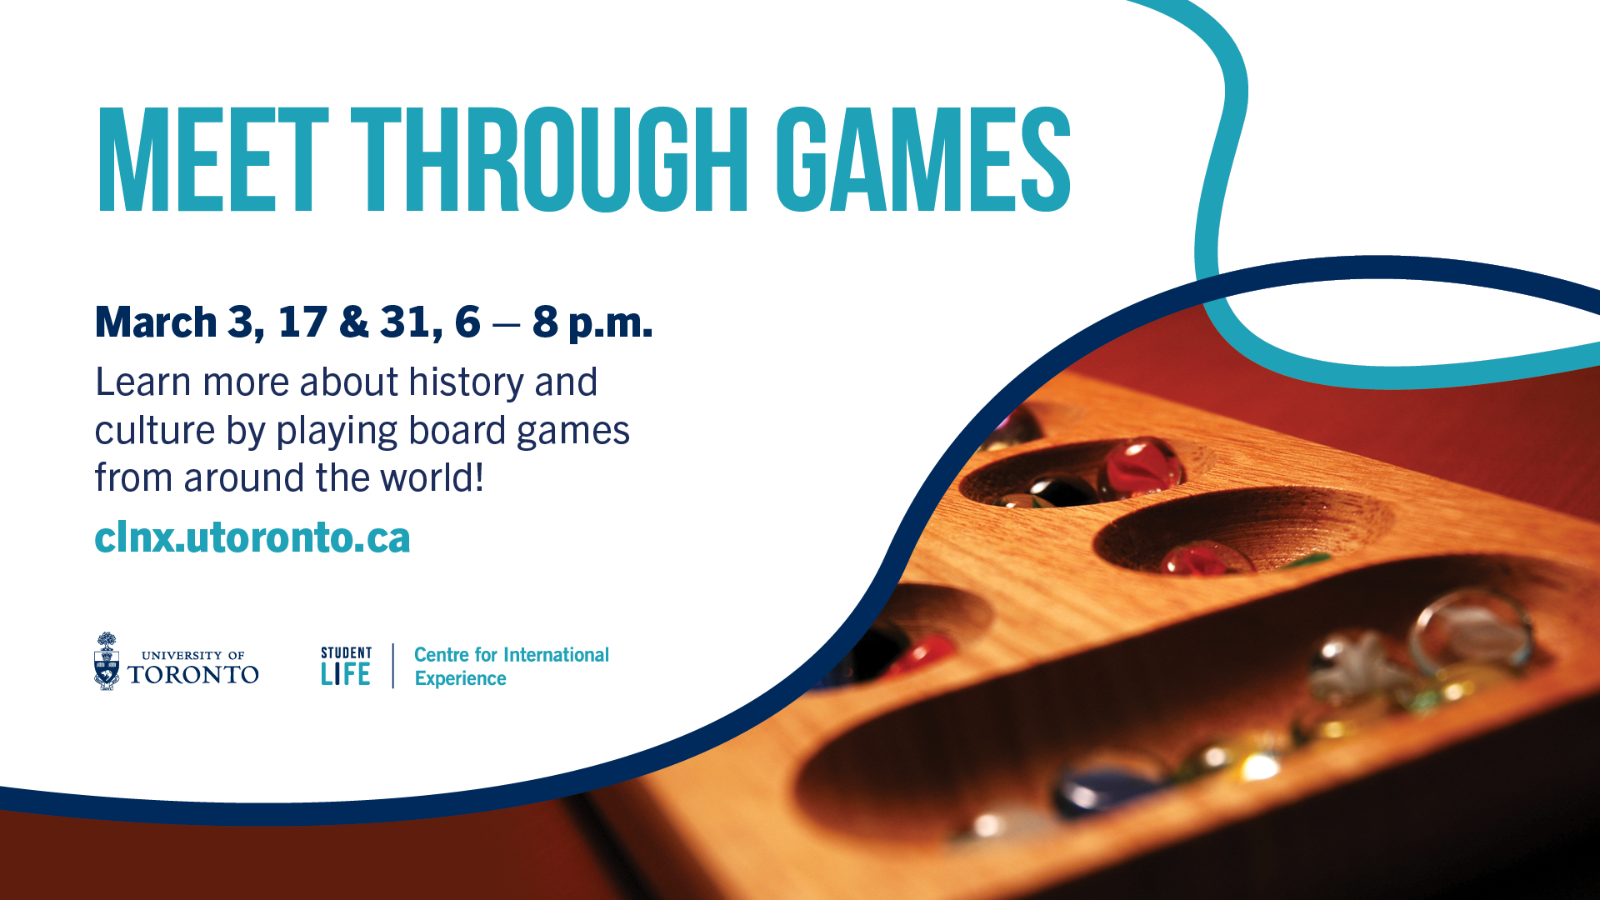 A photo of mancala/congkak, with text "Meet Through Games; March 3, 17, 31, 6PM - 8PM; Learn more about history and culture by playing board games from around the world. clnx.utoronto.ca".